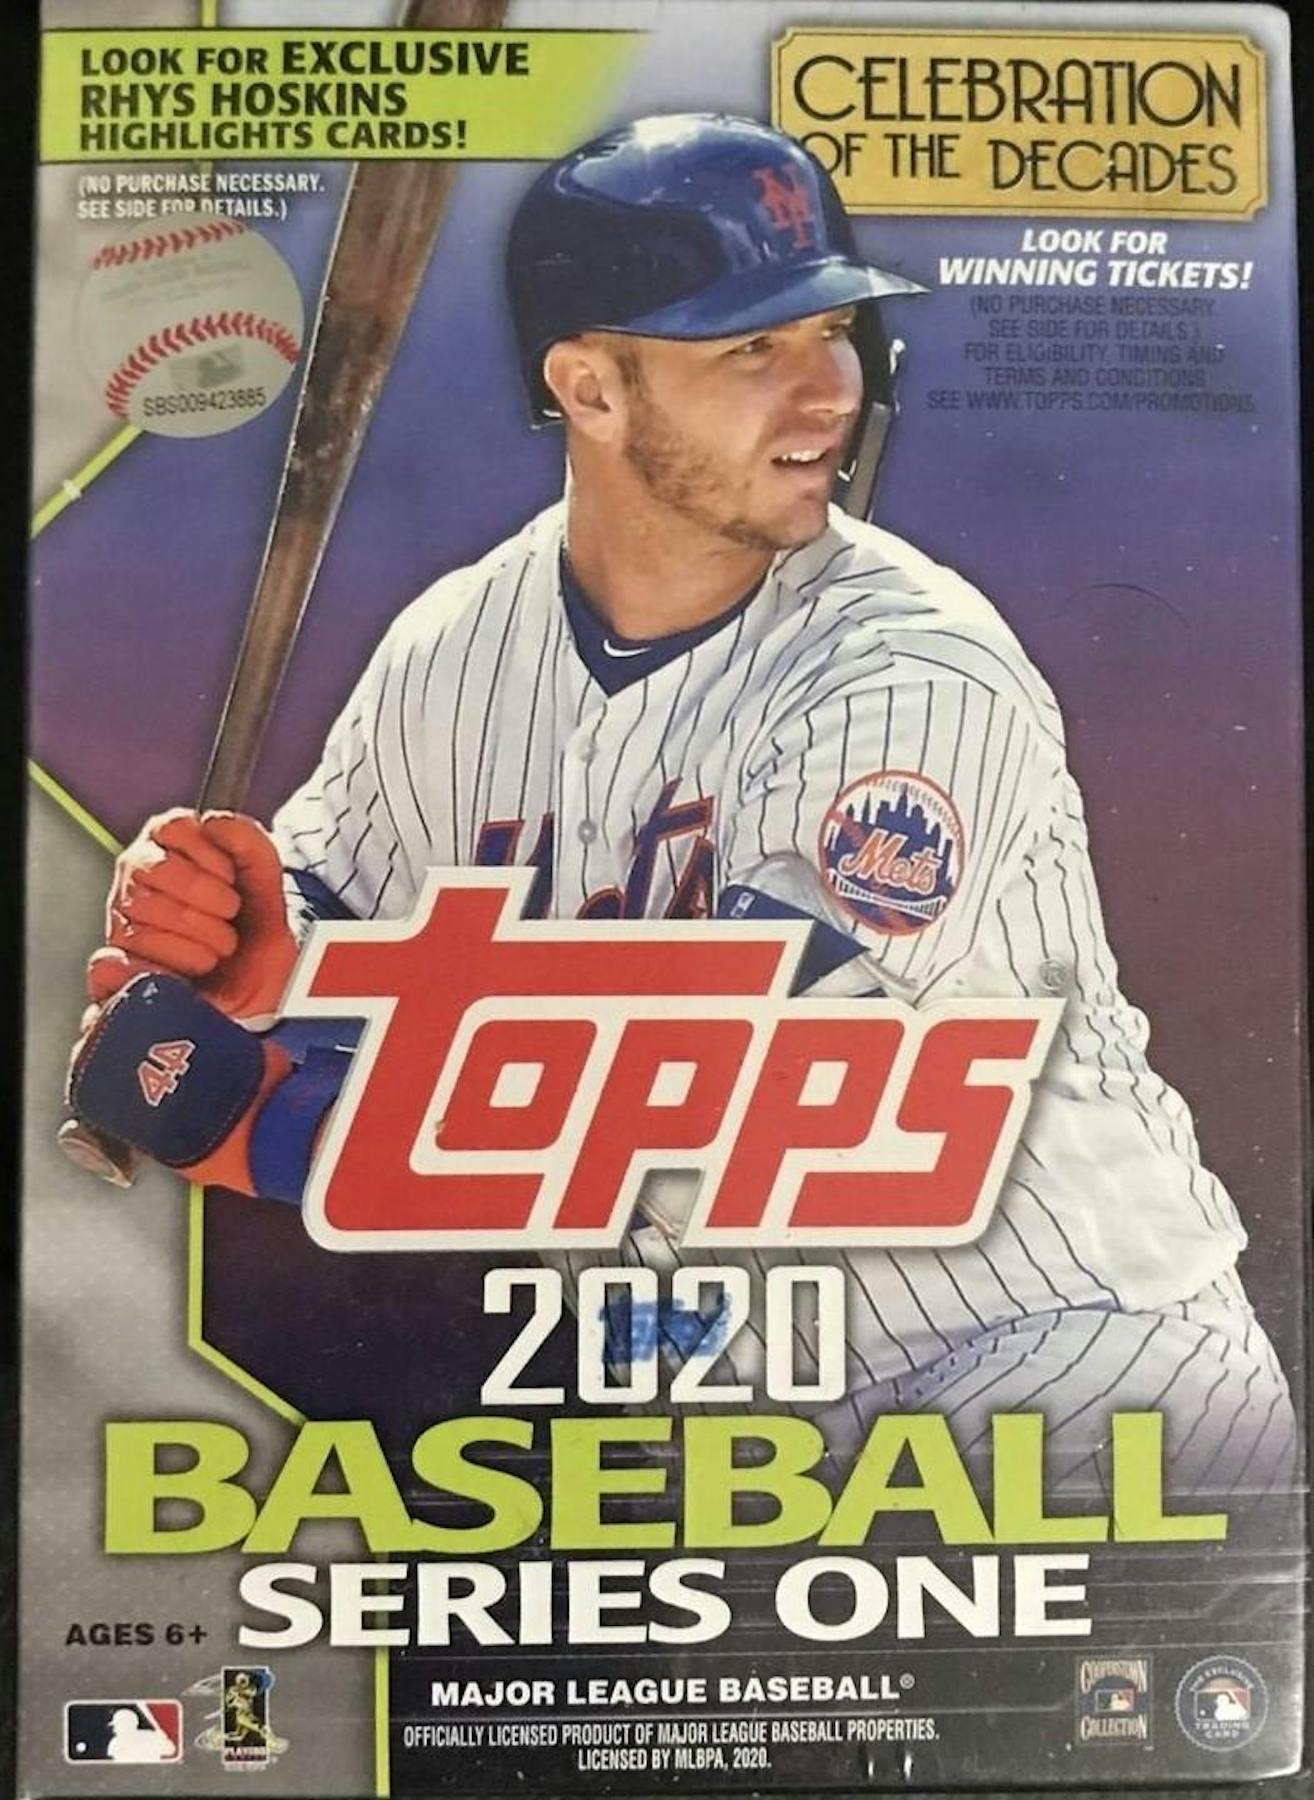 Rhys Hoskins Posters for Sale